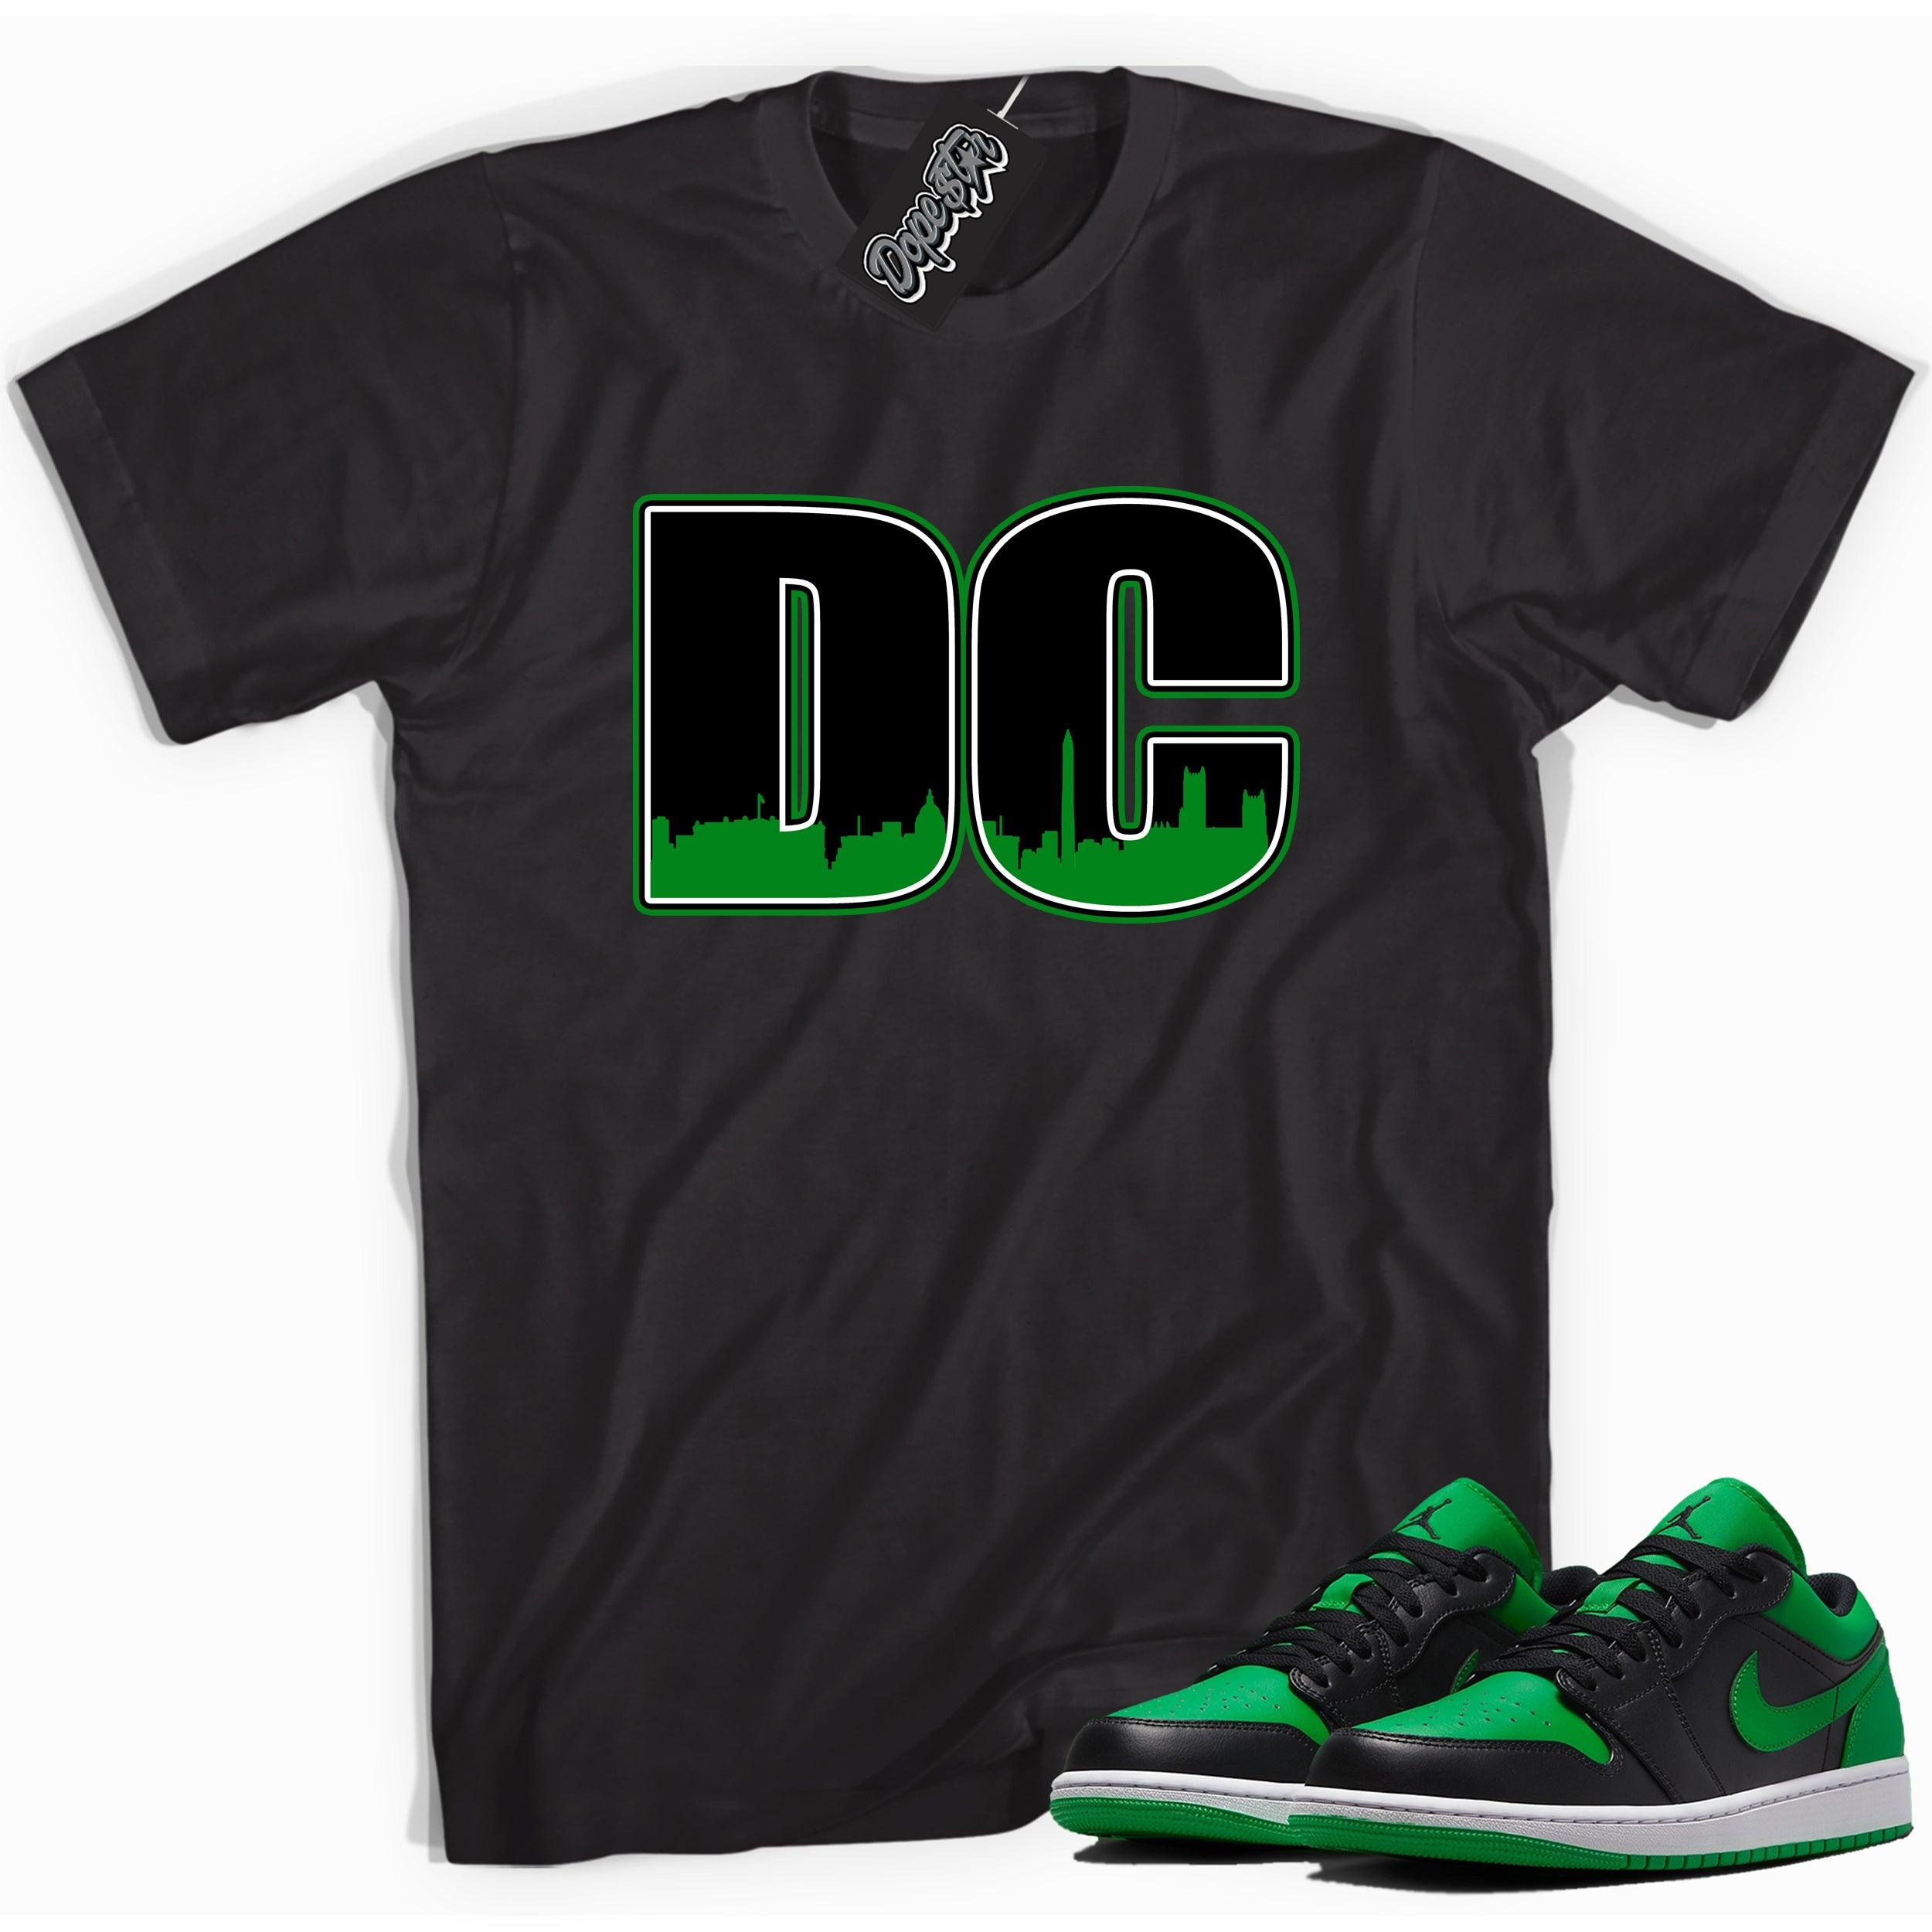 Cool black graphic tee with 'DC' print, that perfectly matches Air Jordan 1 Low Lucky Green sneakers